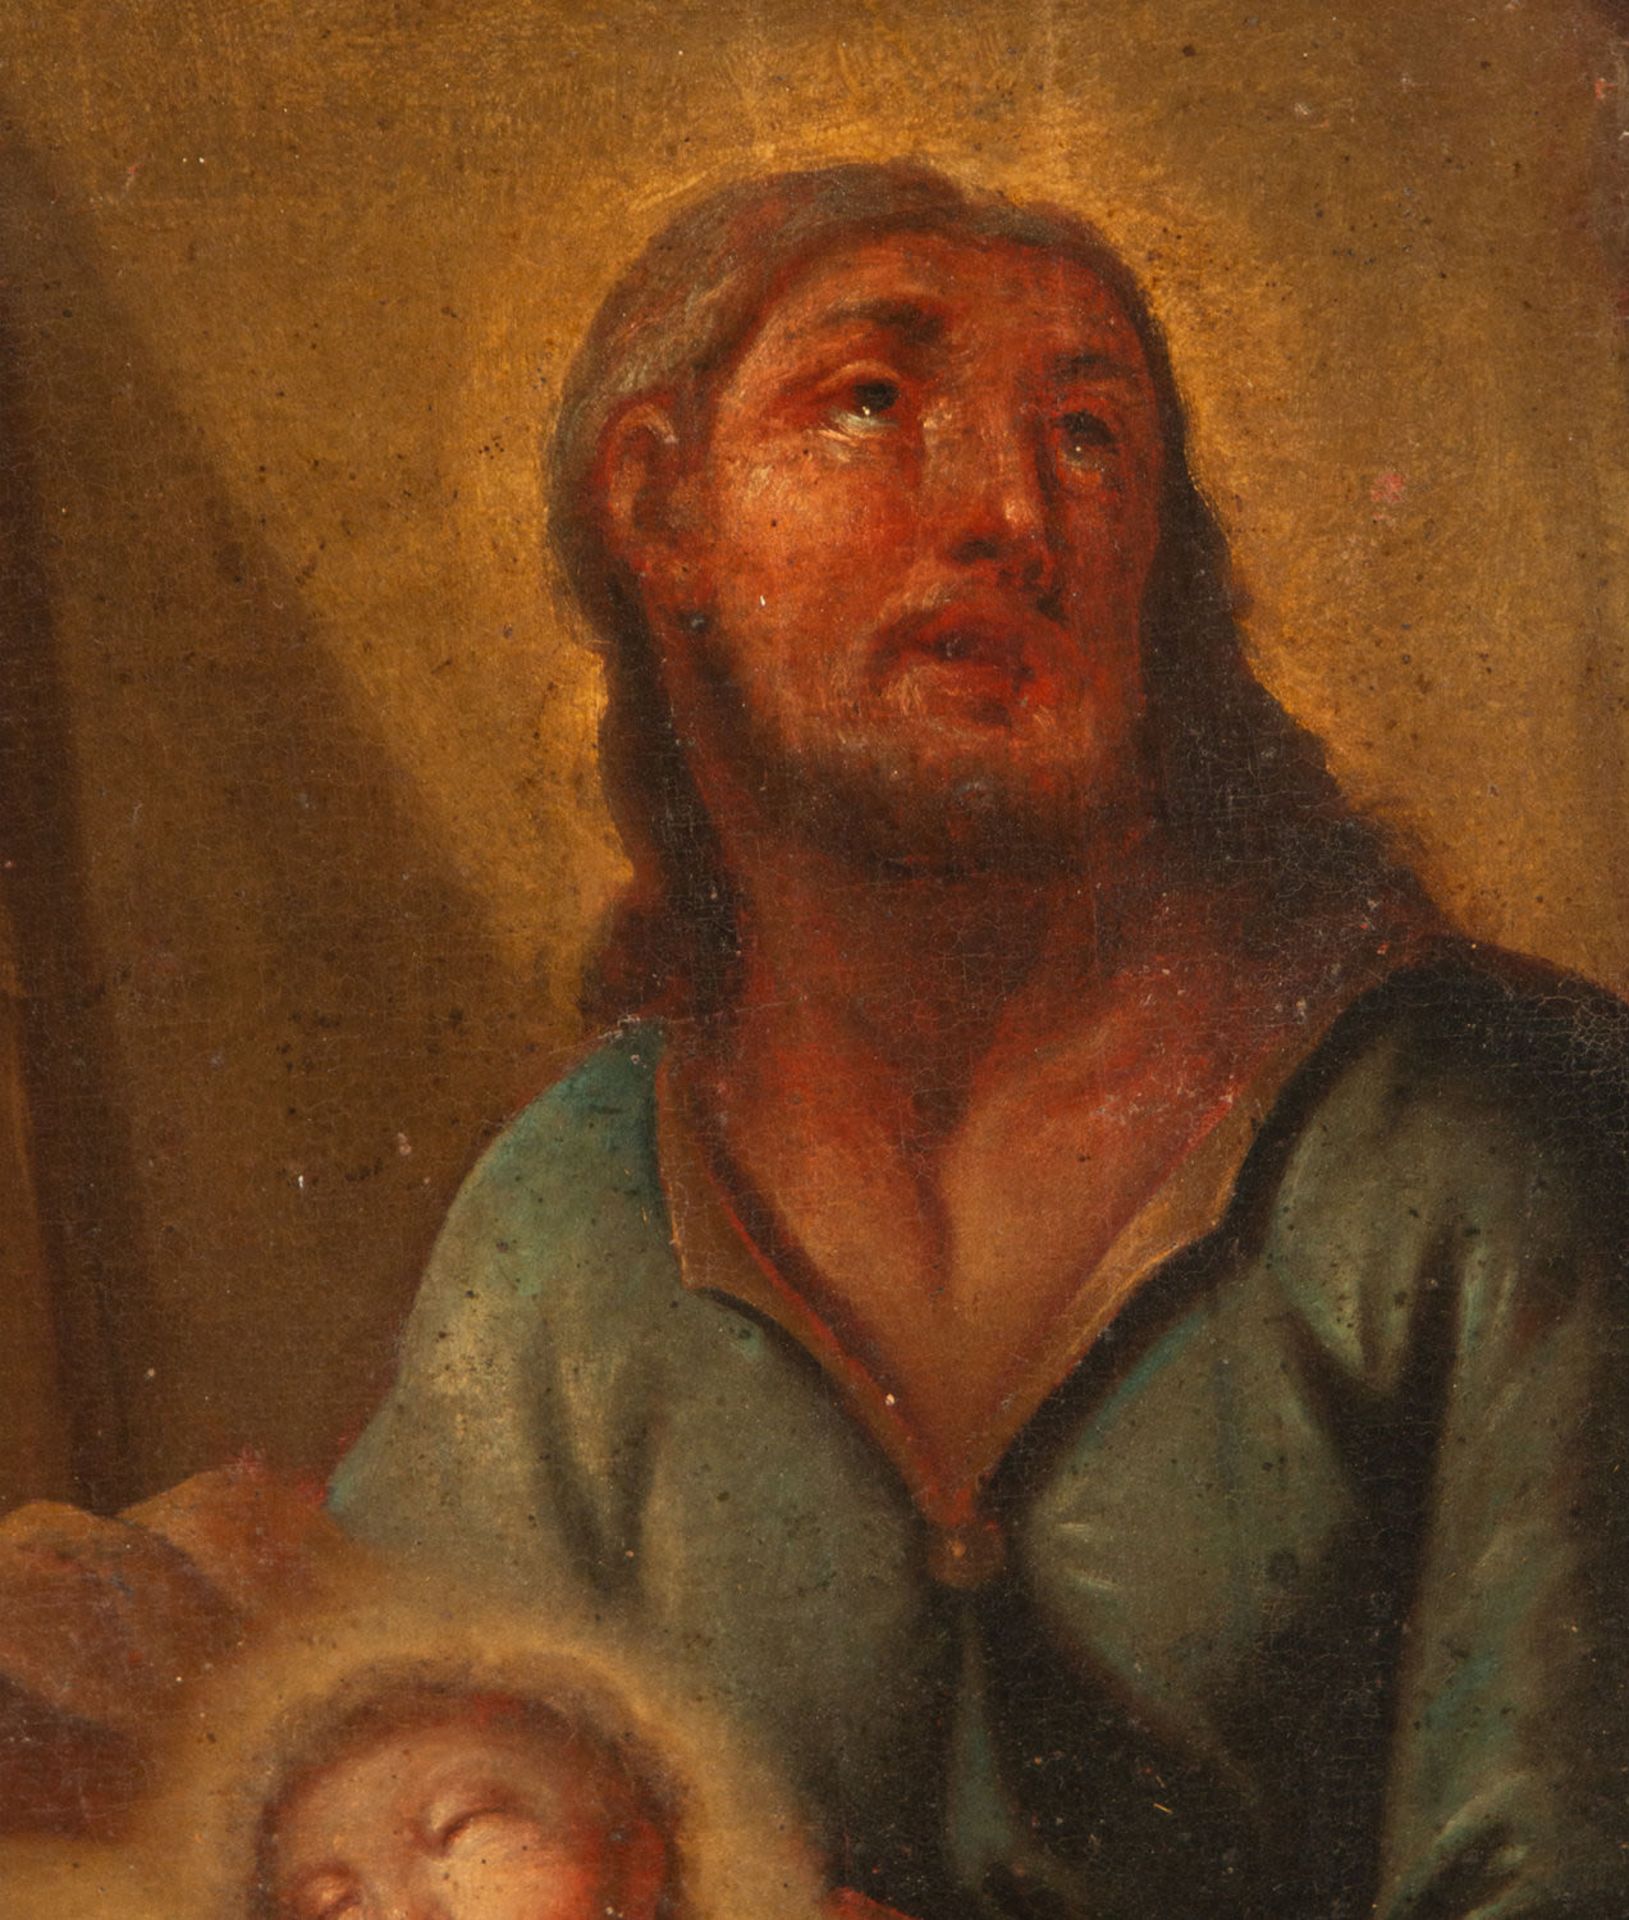 Saint Joseph with the Child in Arms, possibly Italian school of the 18th century - Image 3 of 5